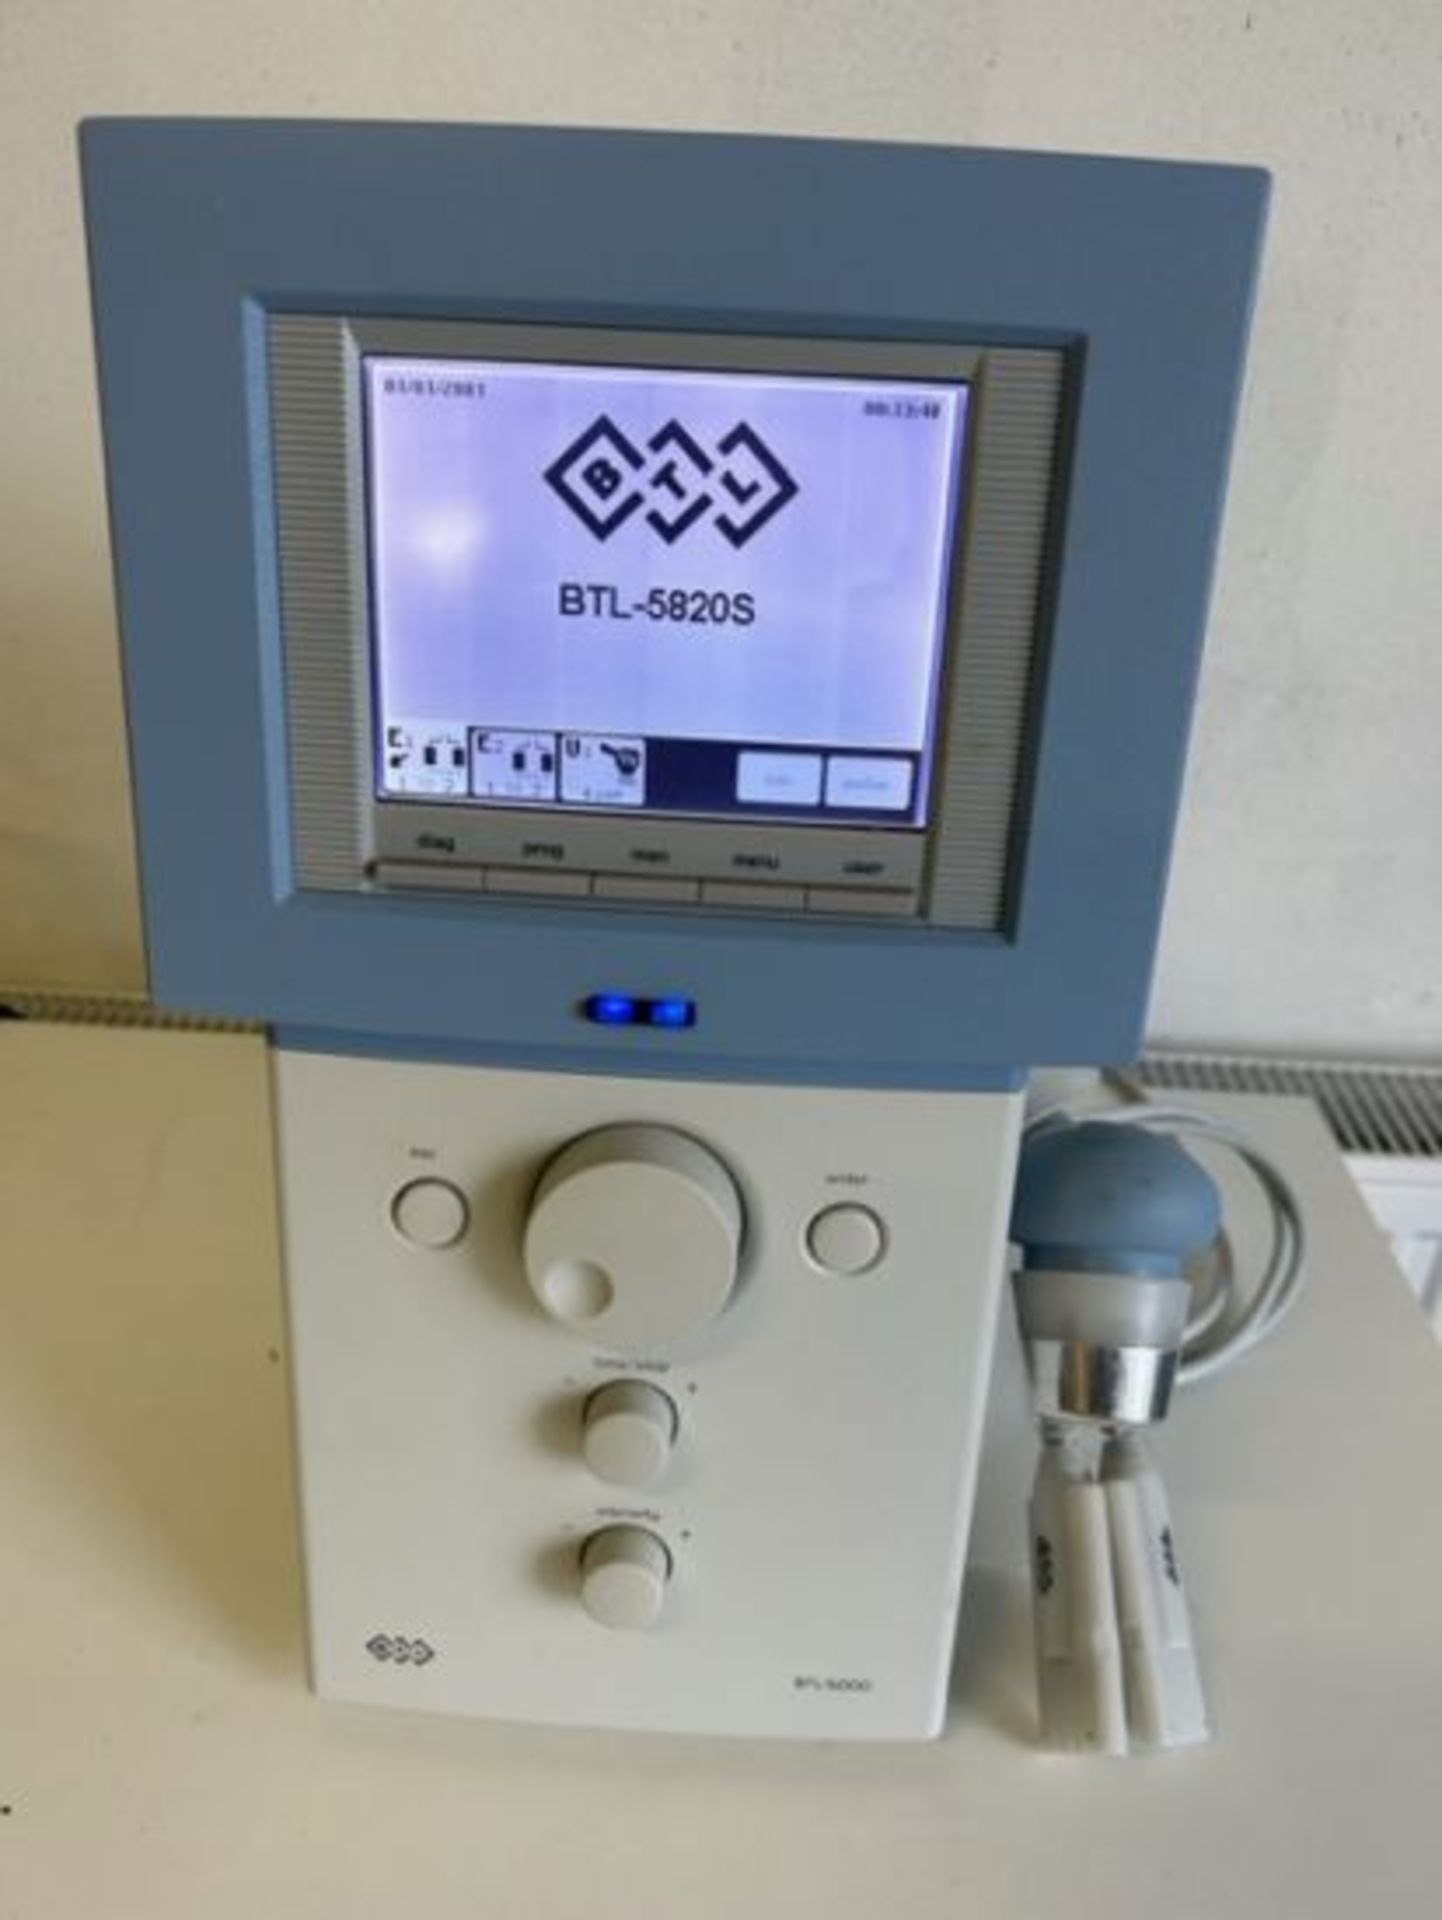 BTL-5820S Two channel device of an Electrotherapy and Ultrasound.